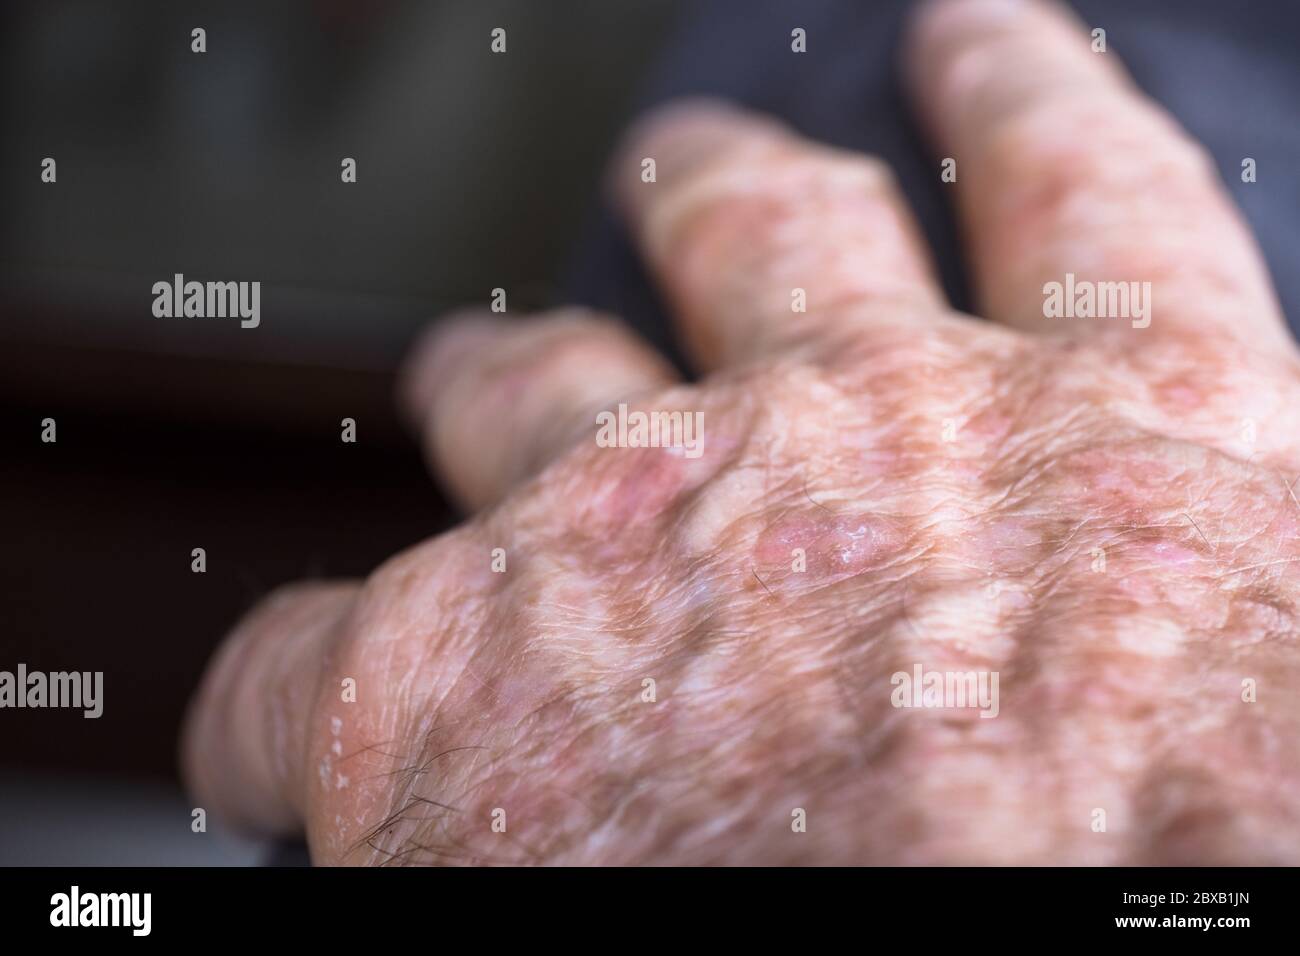 Lesions Of Actinic Keratosis Or Sunspots On Sun Damaged Skin Of The Hand Of A Man This Can Be Treated With Cryosurgery Or Certain Ointments Stock Photo Alamy